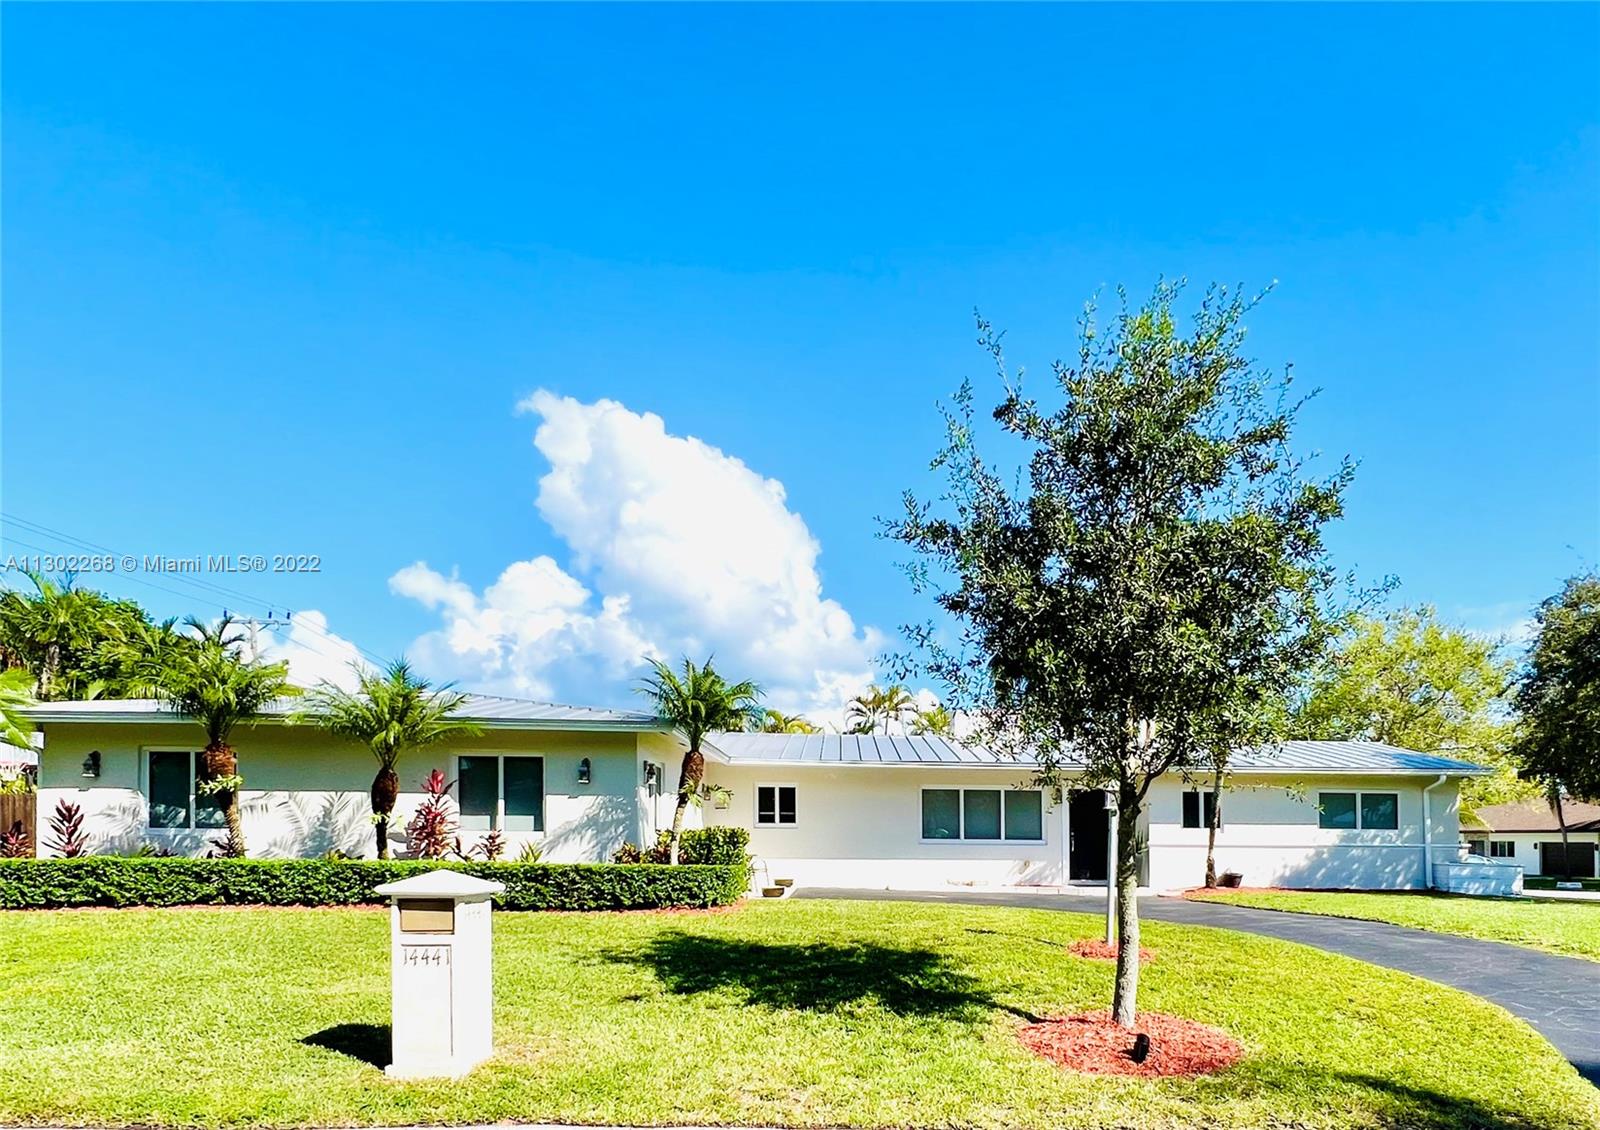 Enjoy real South Florida living in this incredible 3 Bedroom plus a Den & 3 Bathroom property within the sought after gated golf cart community of Kings Bay in Coral Gables. This remodeled bright & spacious home includes hurricane impact windows & doors, an aluminum roof, brand new AC's & duct work, a 2 car garage, & a split floor plan with multiple living areas throughout. The gorgeous kitchen features plenty of counter space with a large eat-in island. Relax in an oversized remodeled pool with a newly installed pump & separate jacuzzi. This is a true boaters paradise offering direct access to Deering Bay Marina with 8 community dedicated boat slips & Dock master access daily from 7am-5pm, with 24hr security. Centrally located in Coral Gables, near the historic Deering Bay Estate!